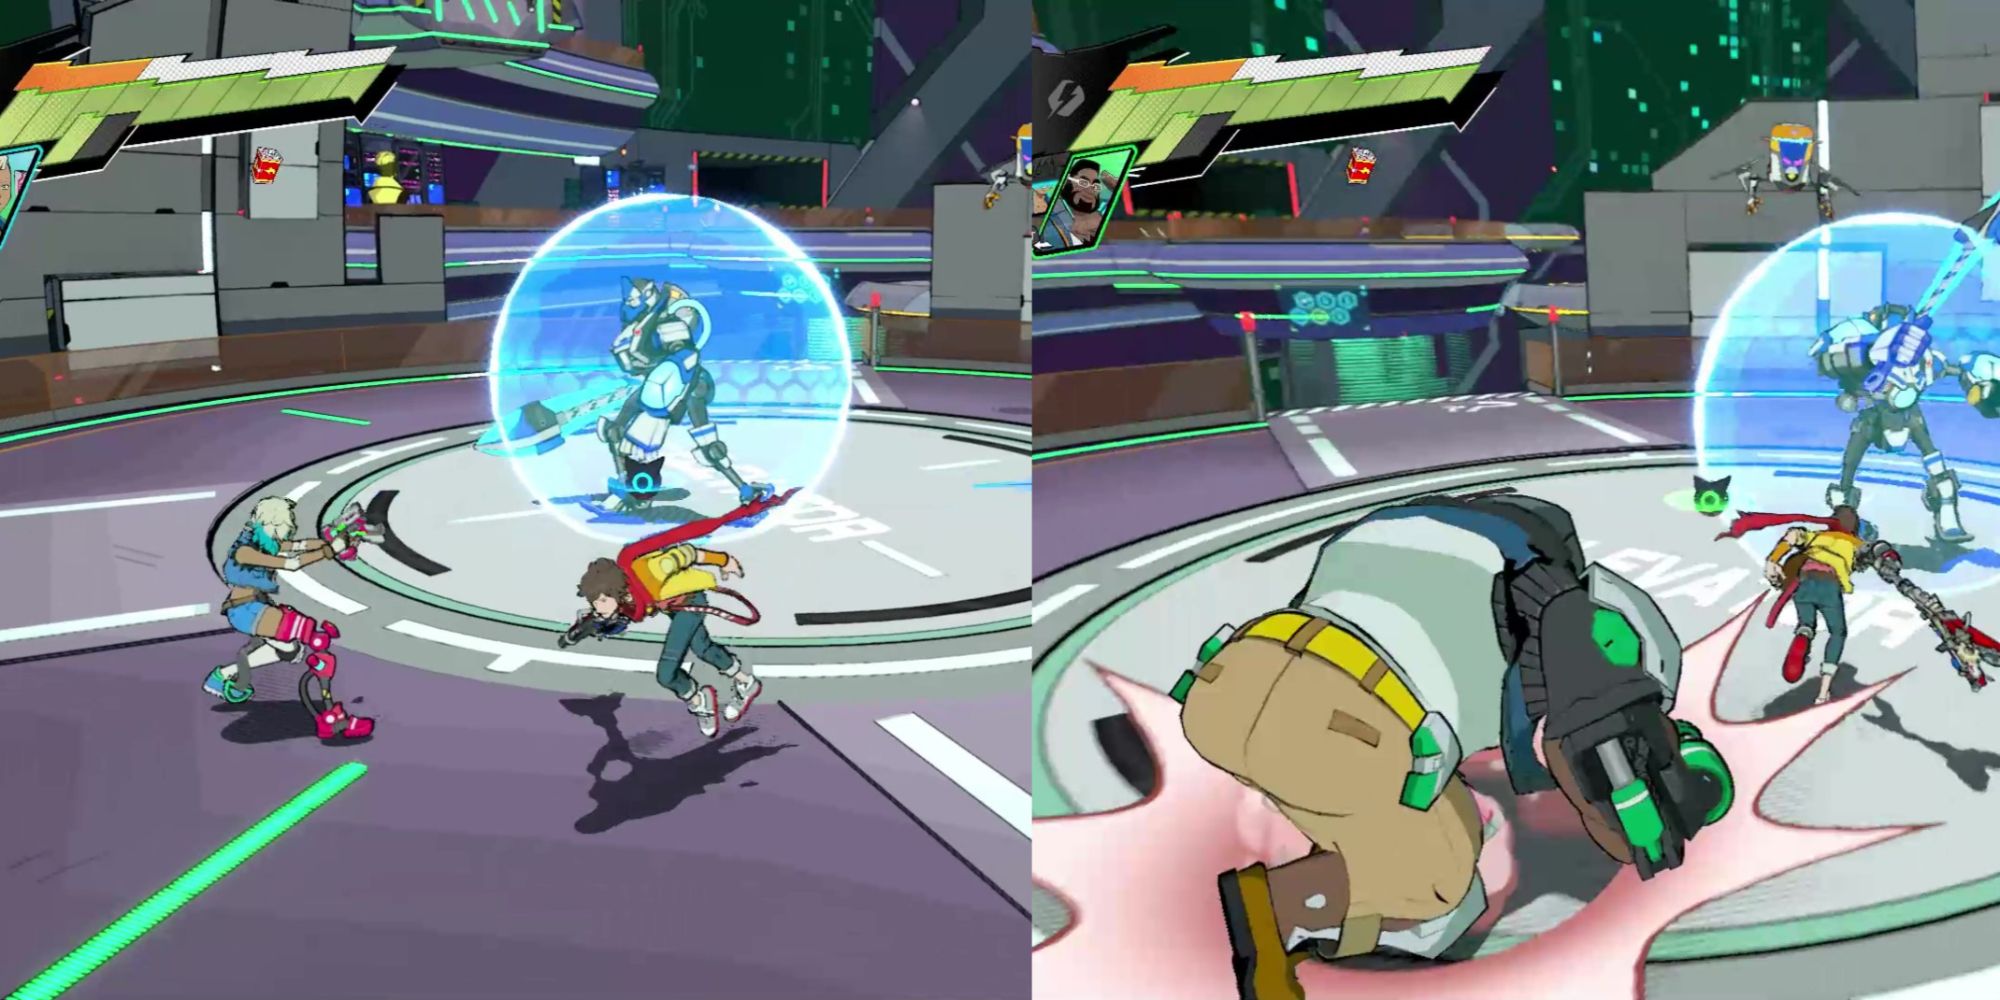 Split Image Showing Peppermint fighting on the left and Macaron fighting on the right